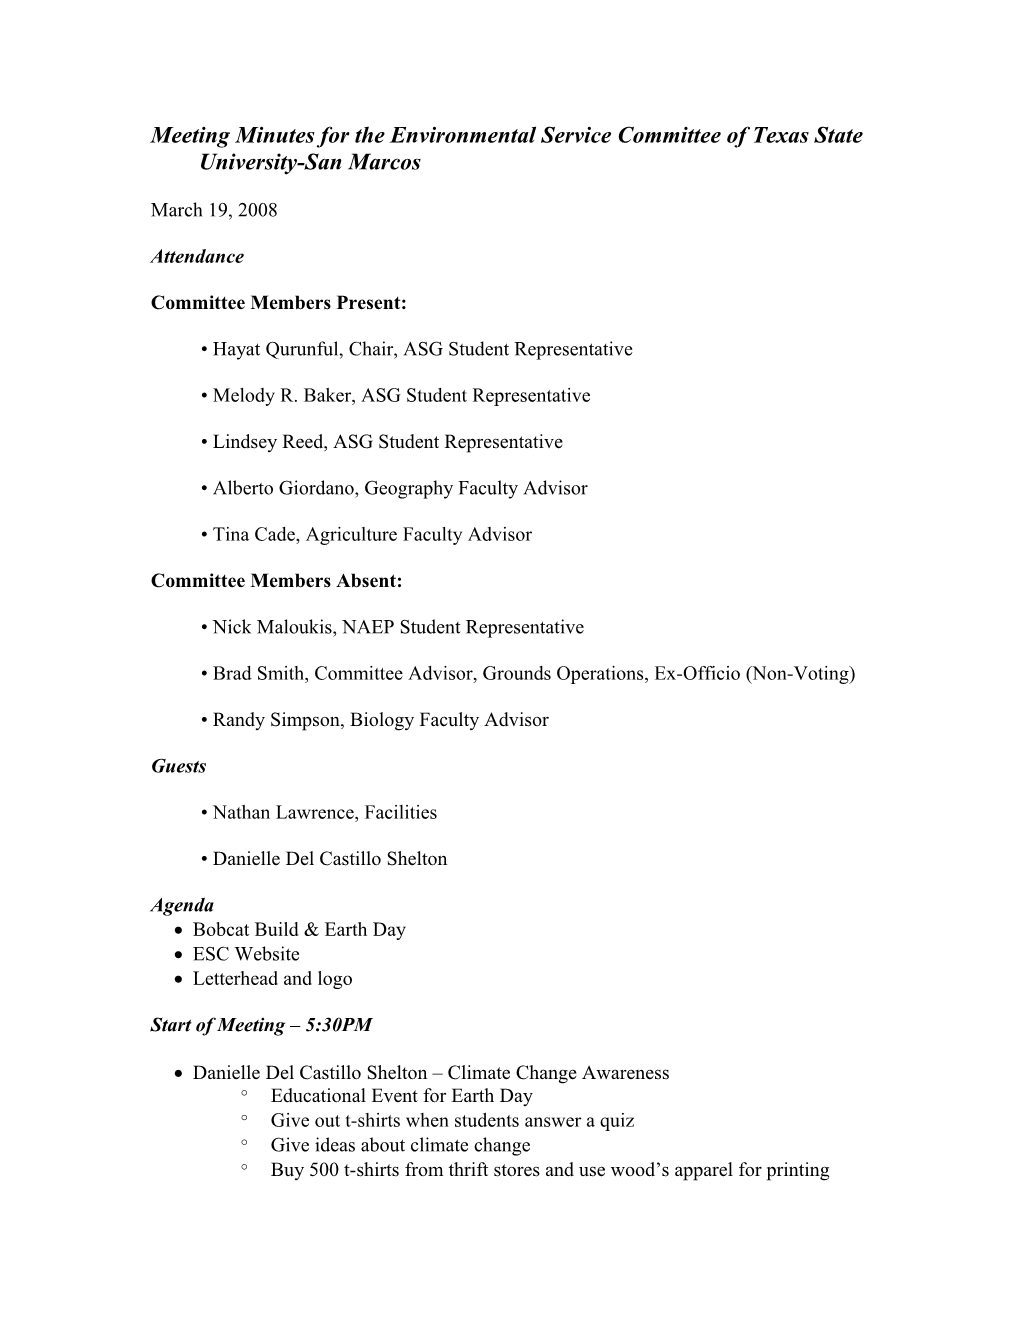 Meeting Minutes for the Environmental Service Committee of Texas State University-San Marcos